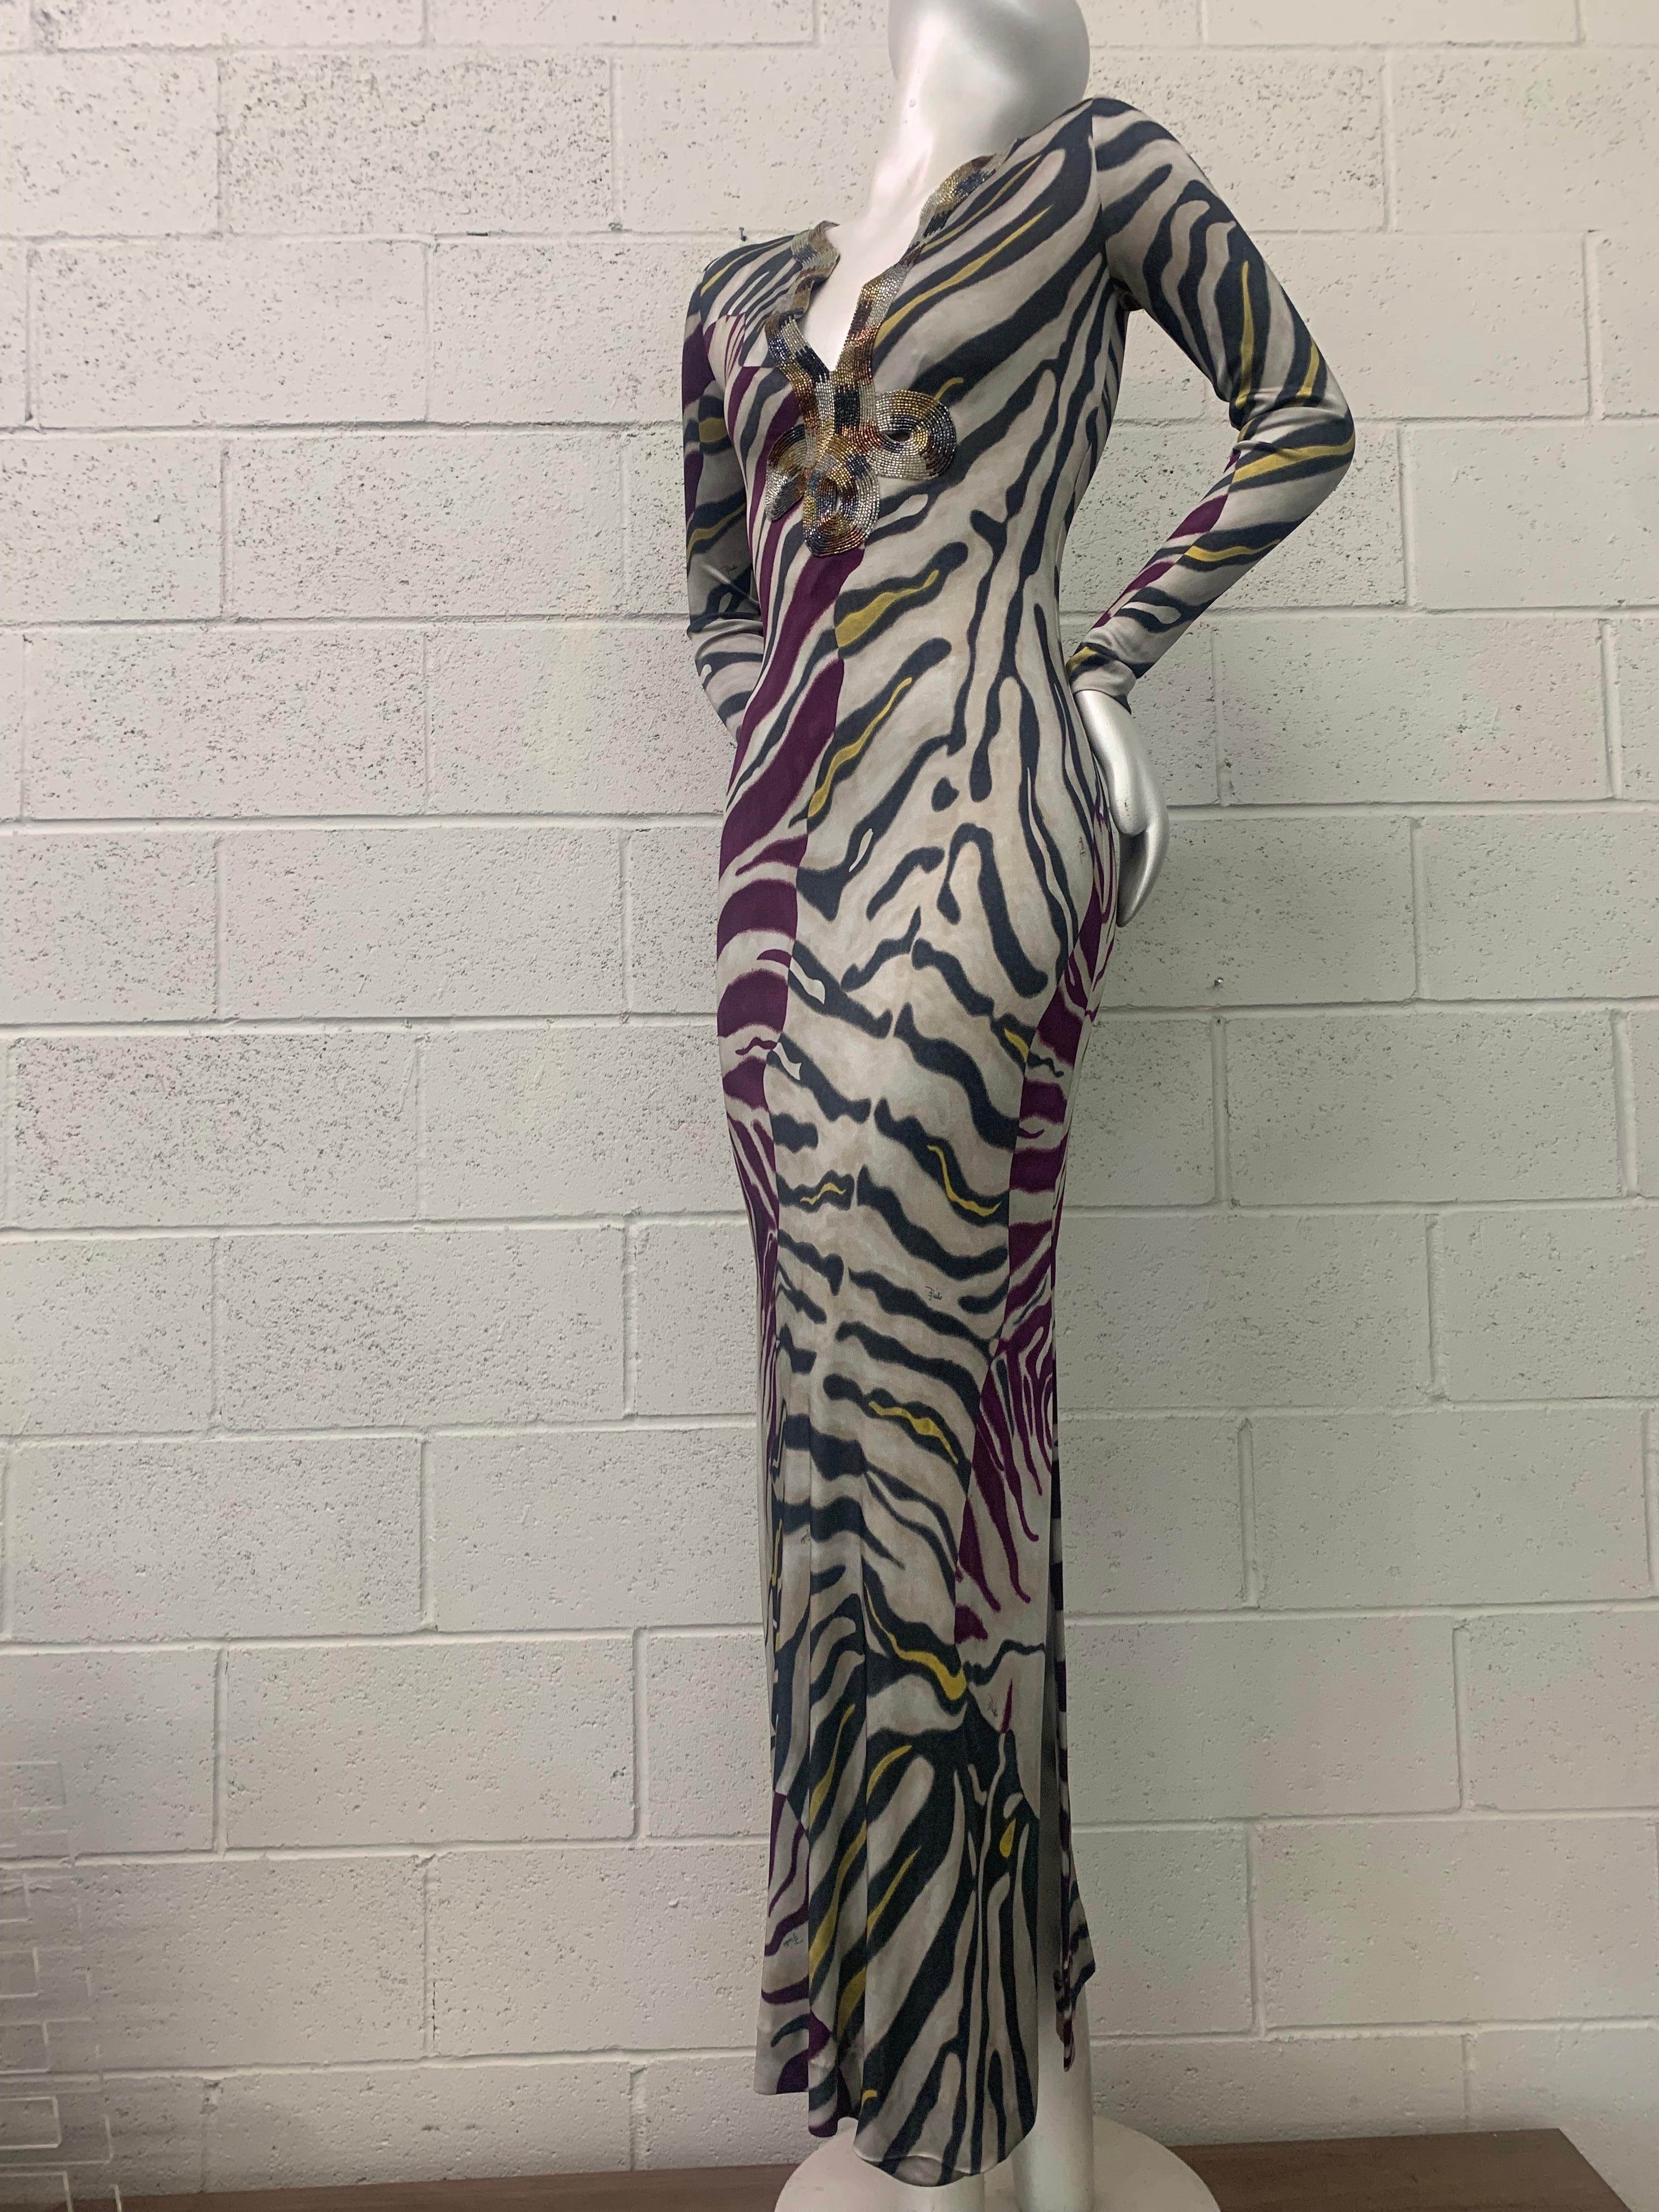 Emilio Pucci Stylized Zebra-Print Body-Conscious Beaded Maxi Dress in Rayon Knit In Excellent Condition For Sale In Gresham, OR